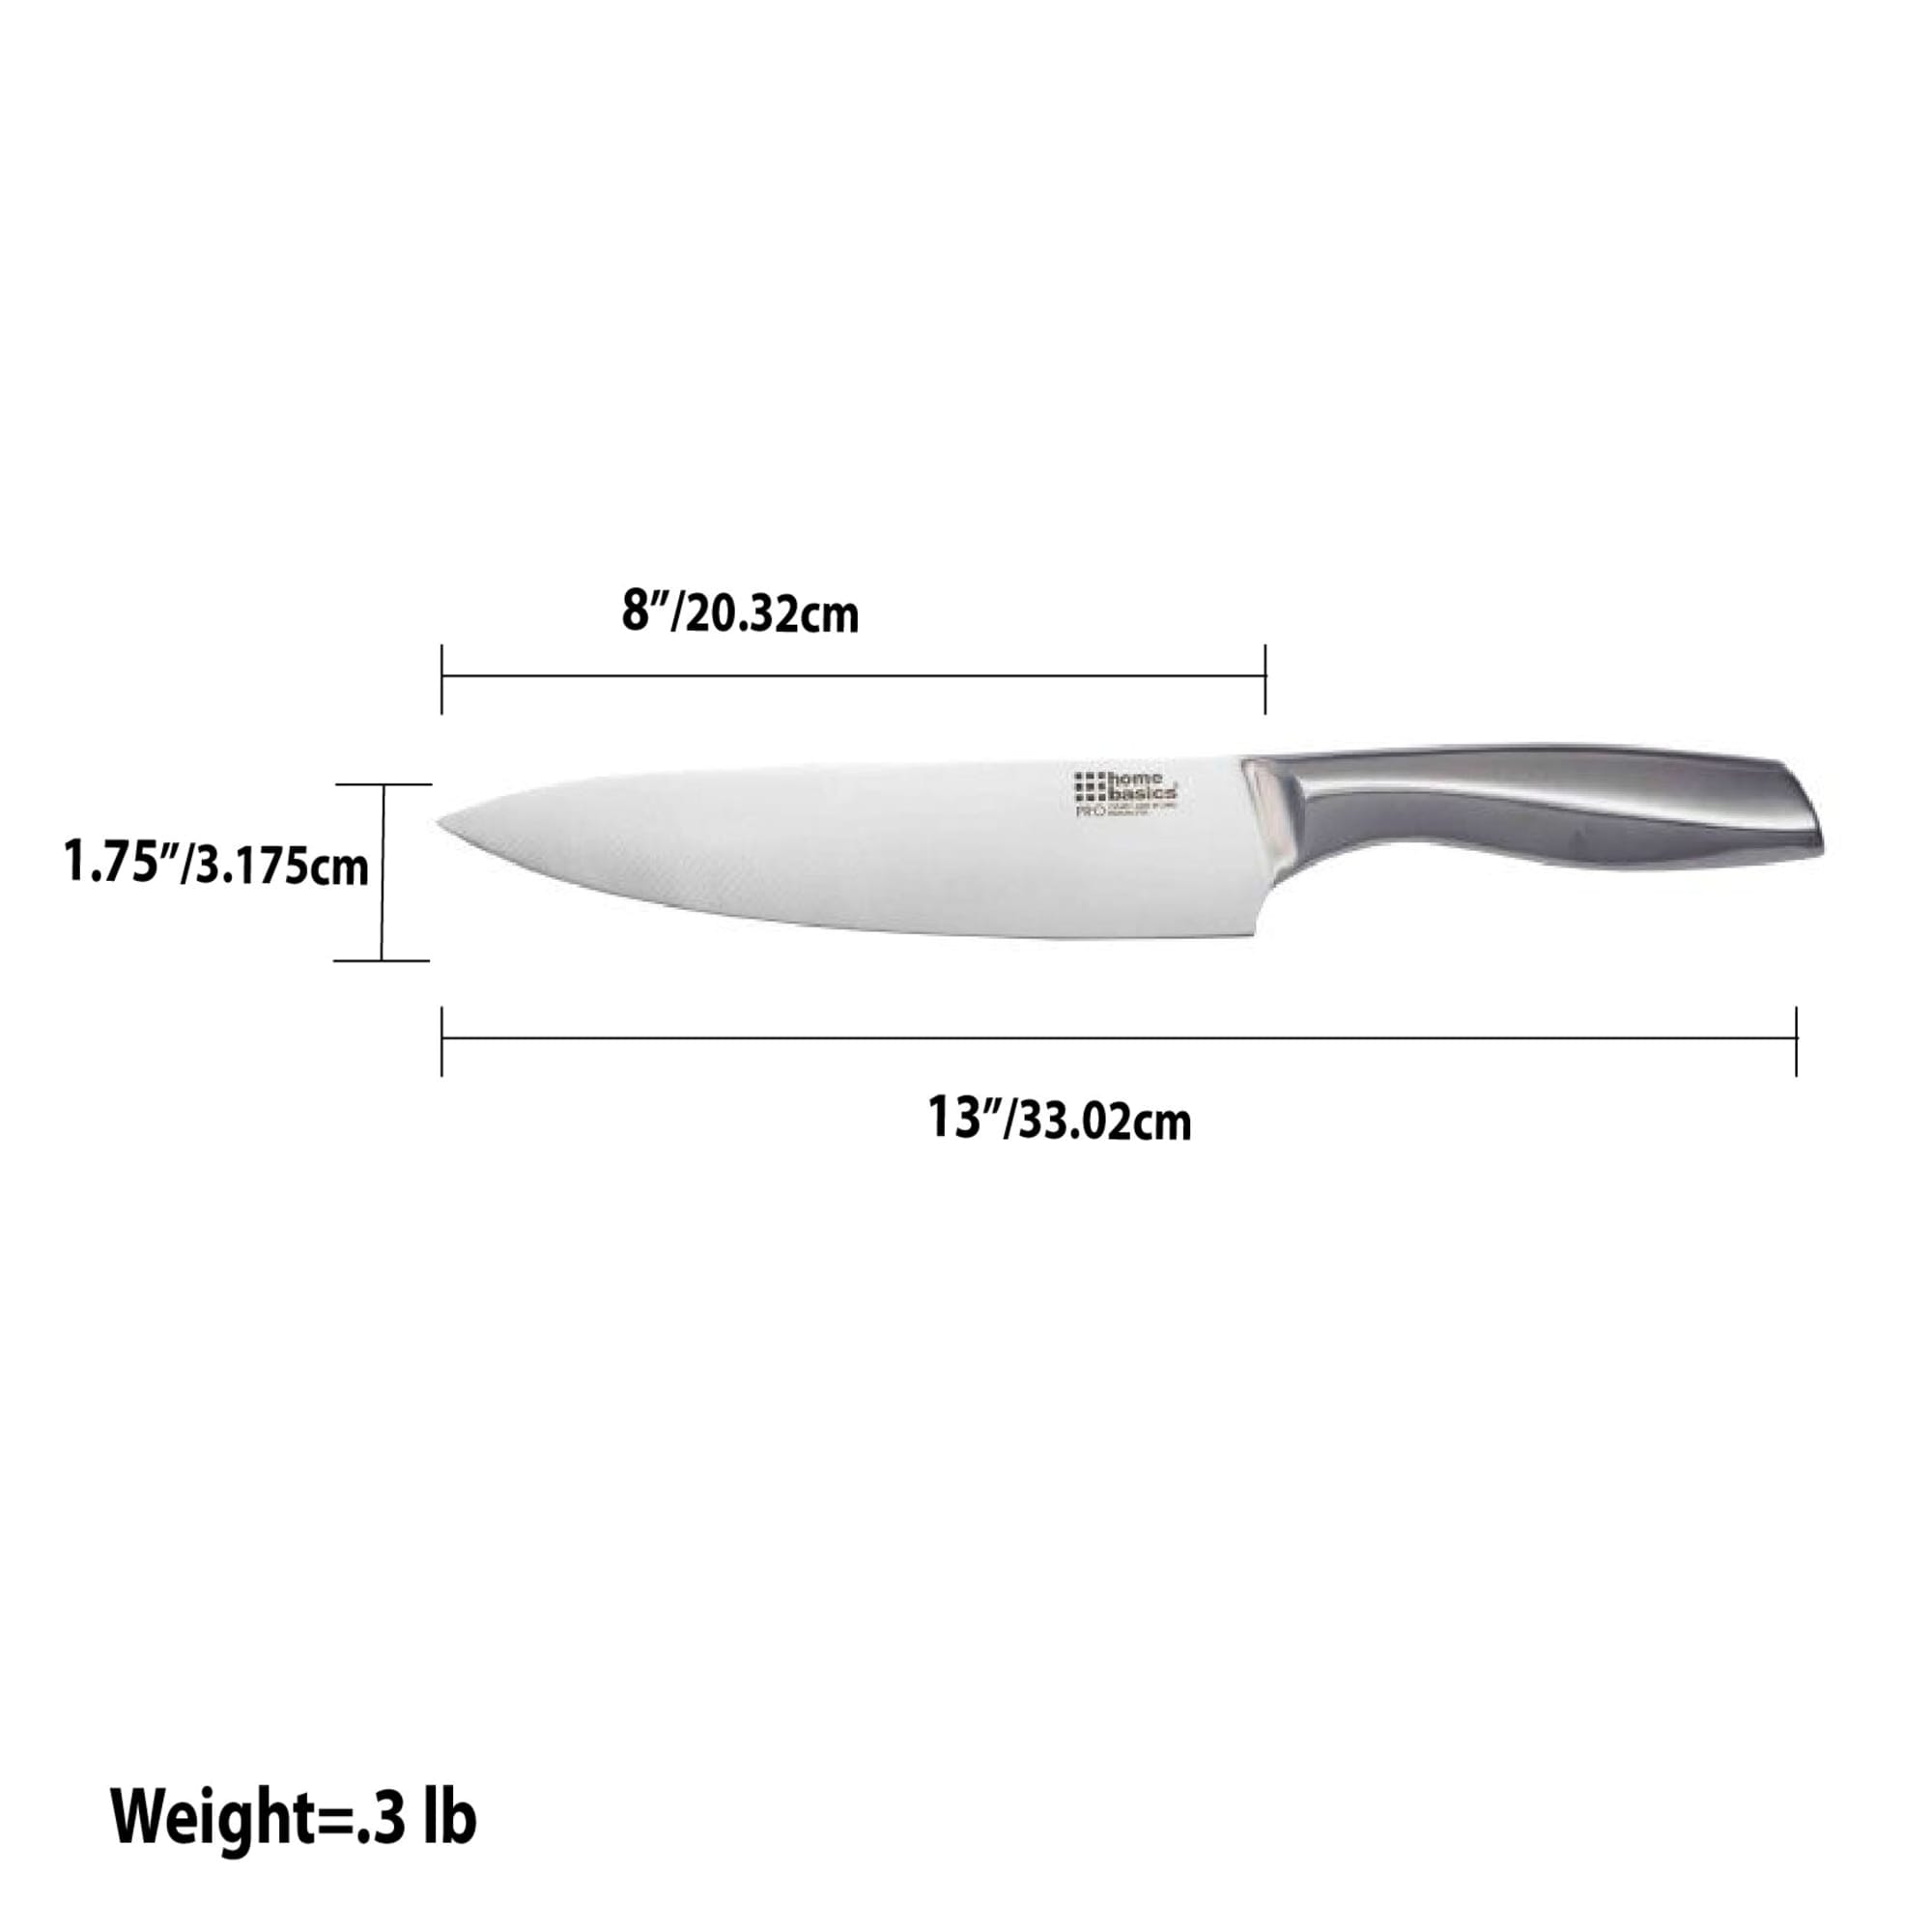 Home Basics 8" Stainless Steel Chef Knife with Handle $5.00 EACH, CASE PACK OF 24